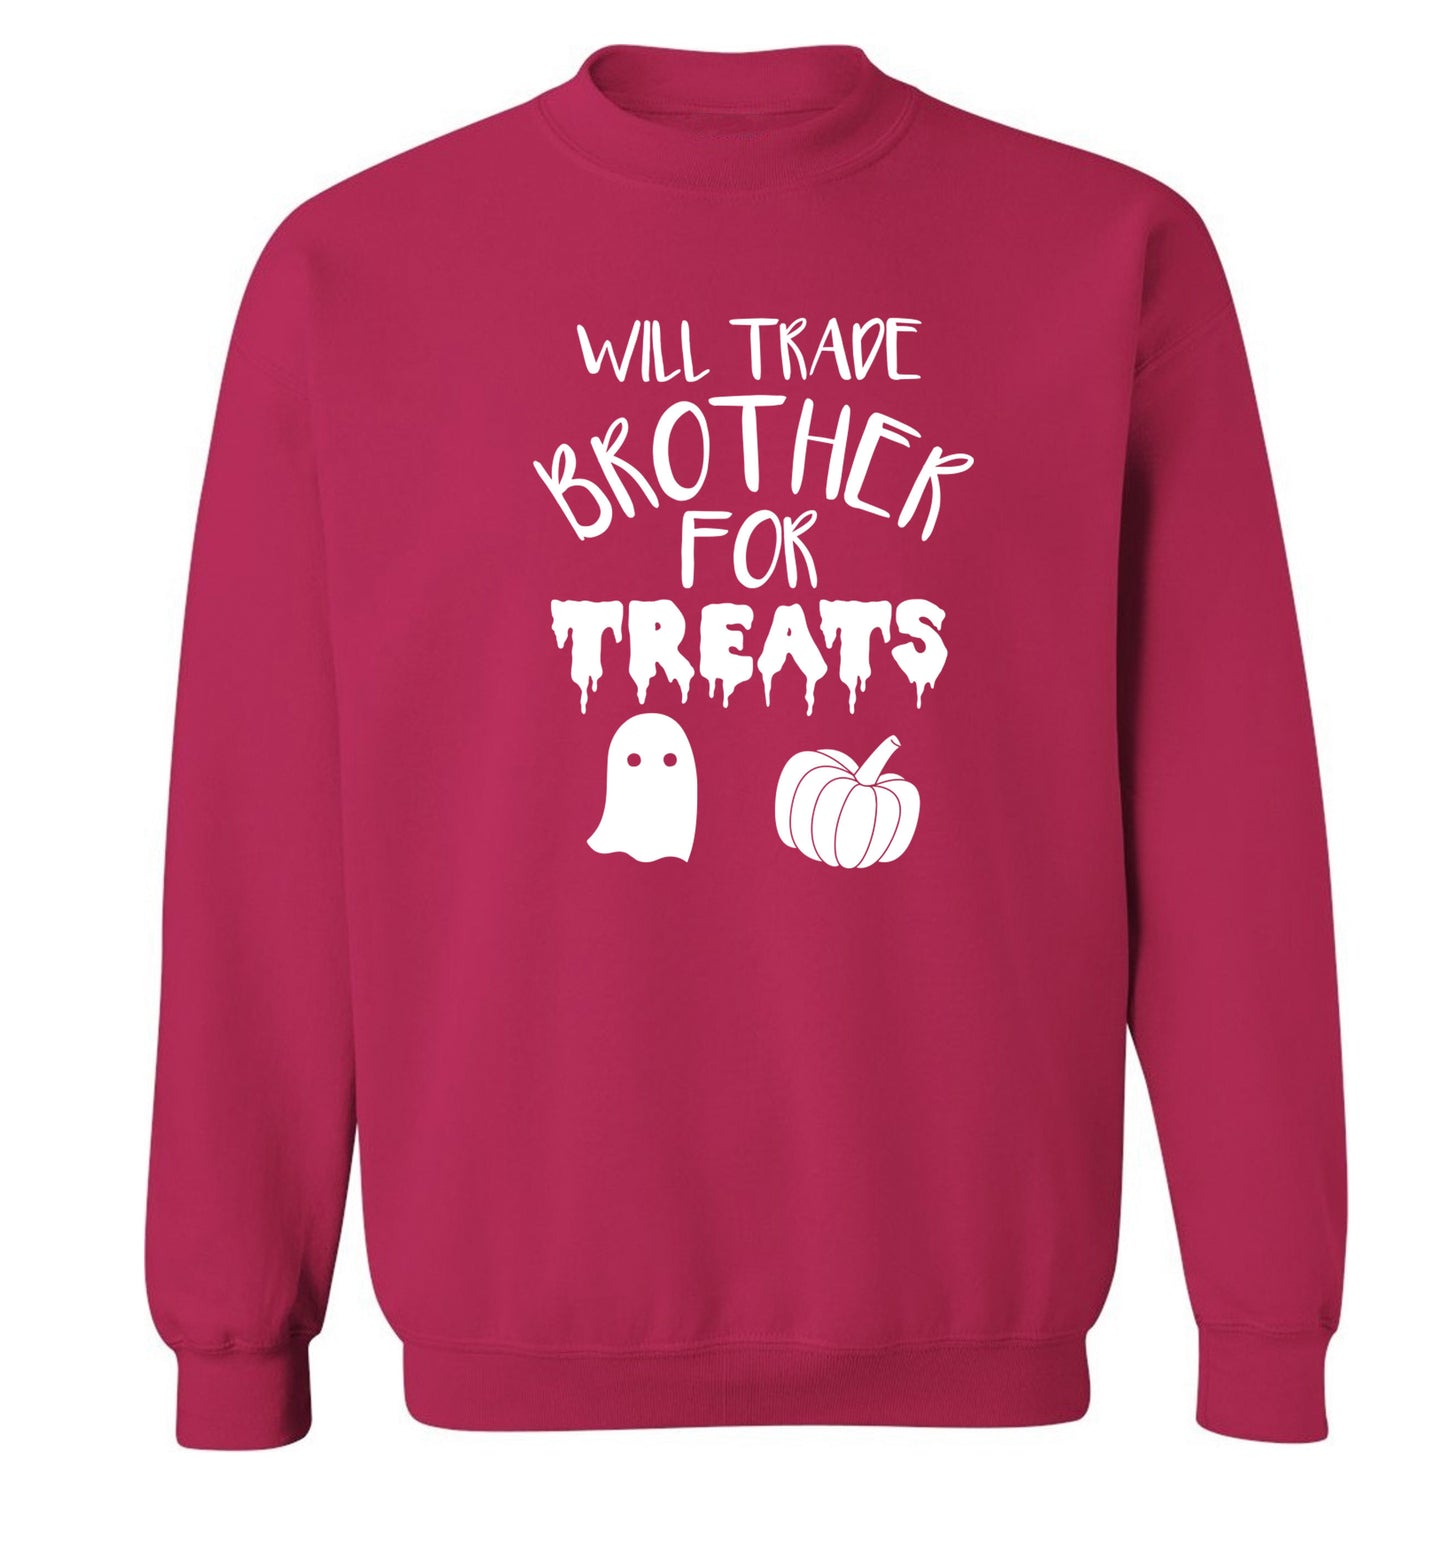 Will trade brother for treats Adult's unisex pink Sweater 2XL